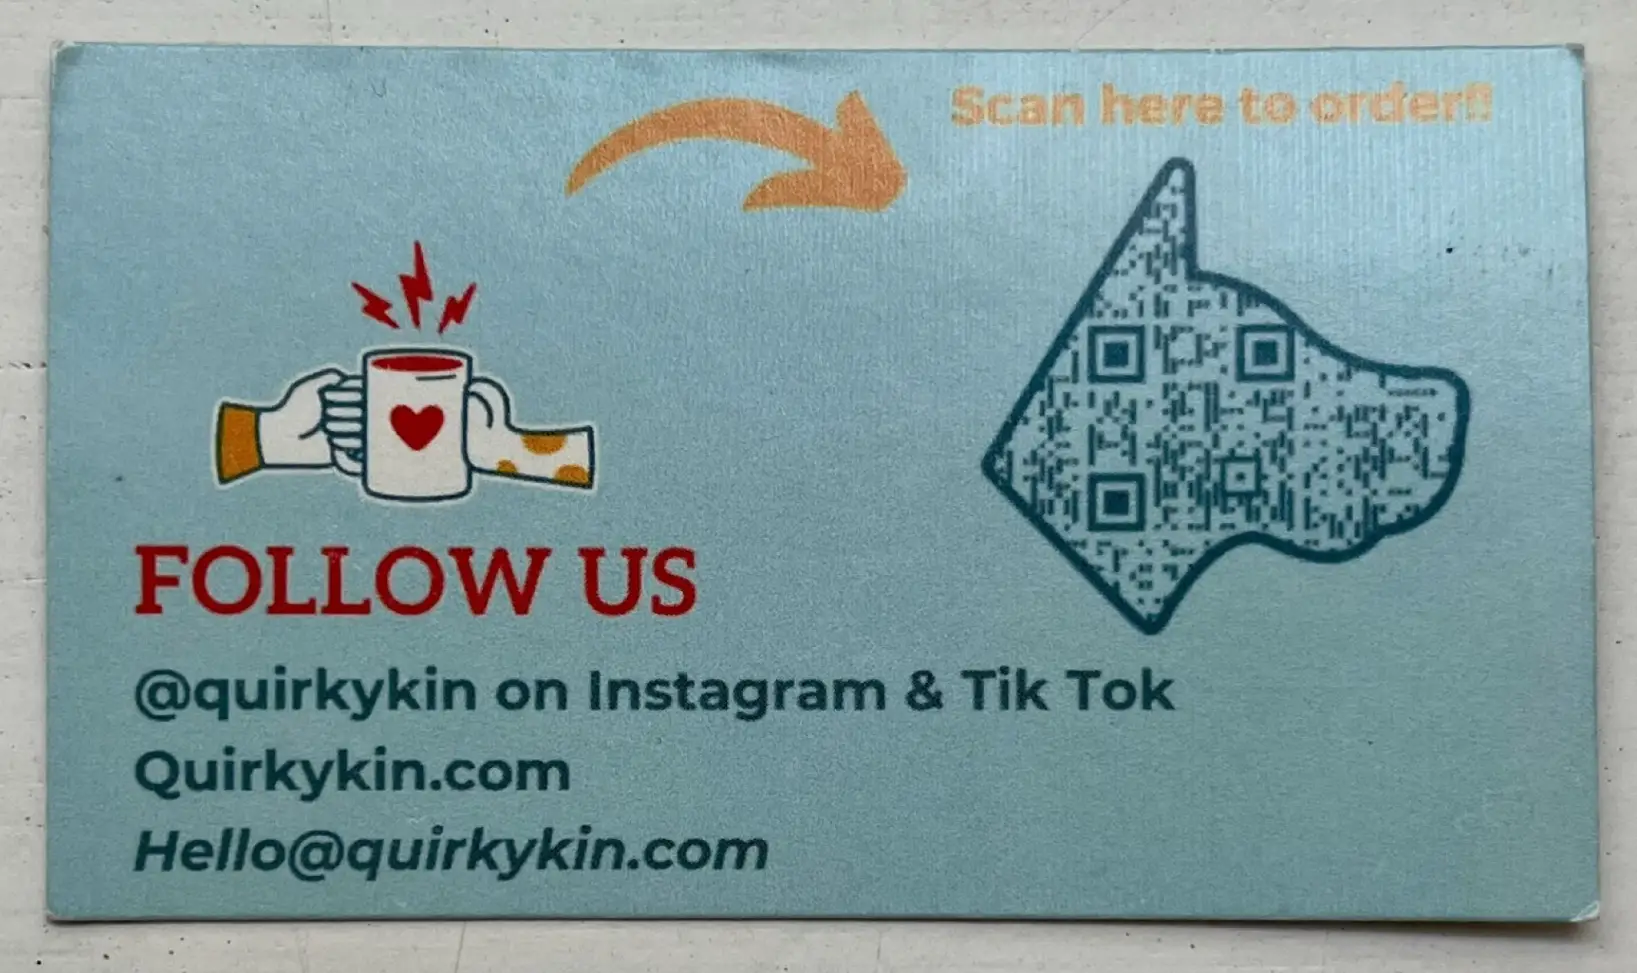 A blue ordering card with a “Follow us” call to action and a dog-shaped QR Code.